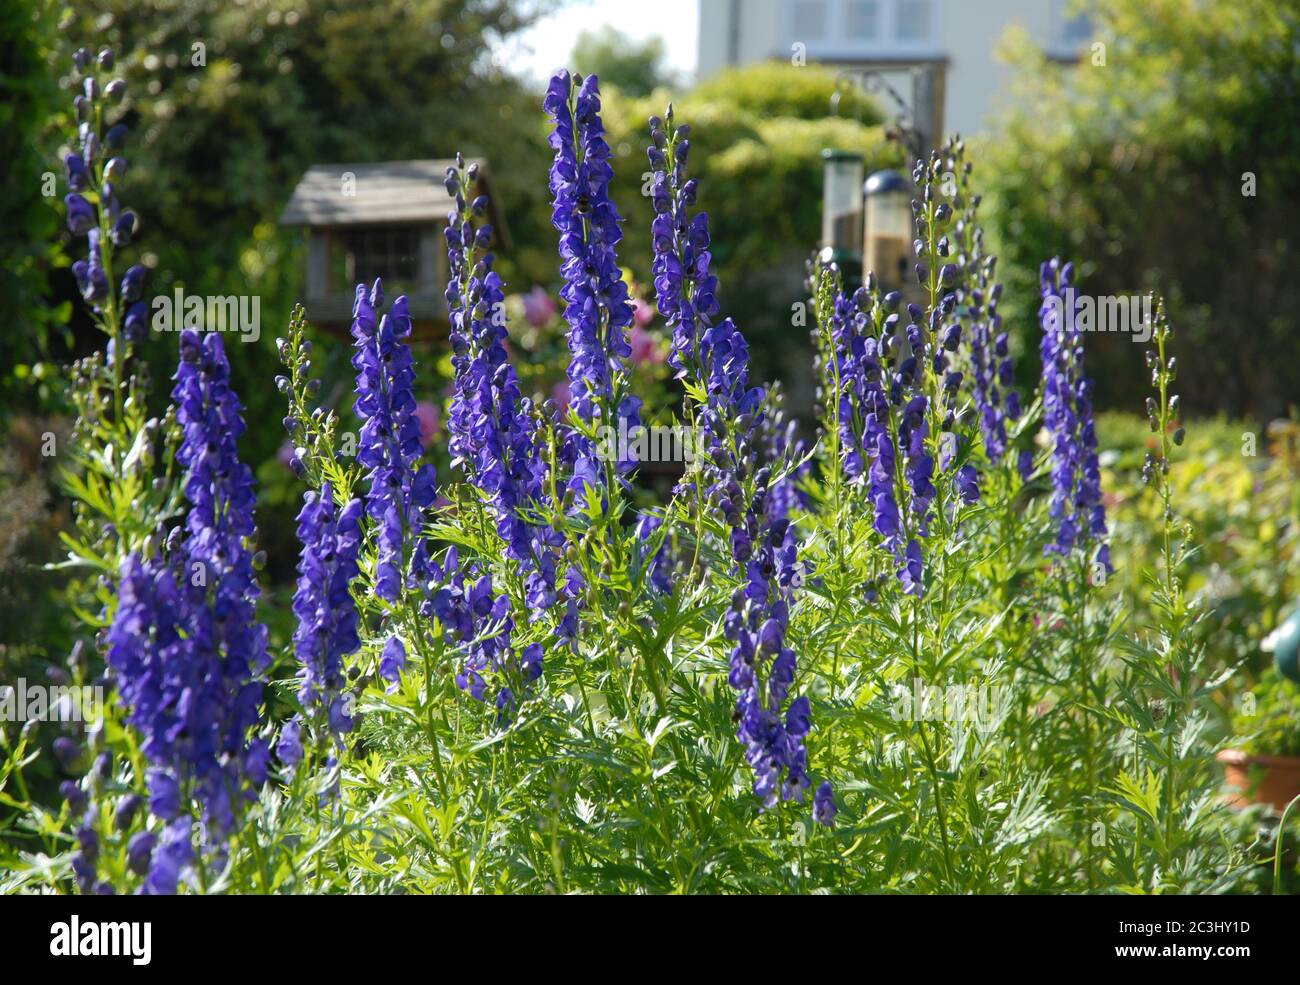 Aconitum napellus, also known as Monkshood or wolf's bane, a poisonous perennial herb, growing in an English cottage garden Stock Photo